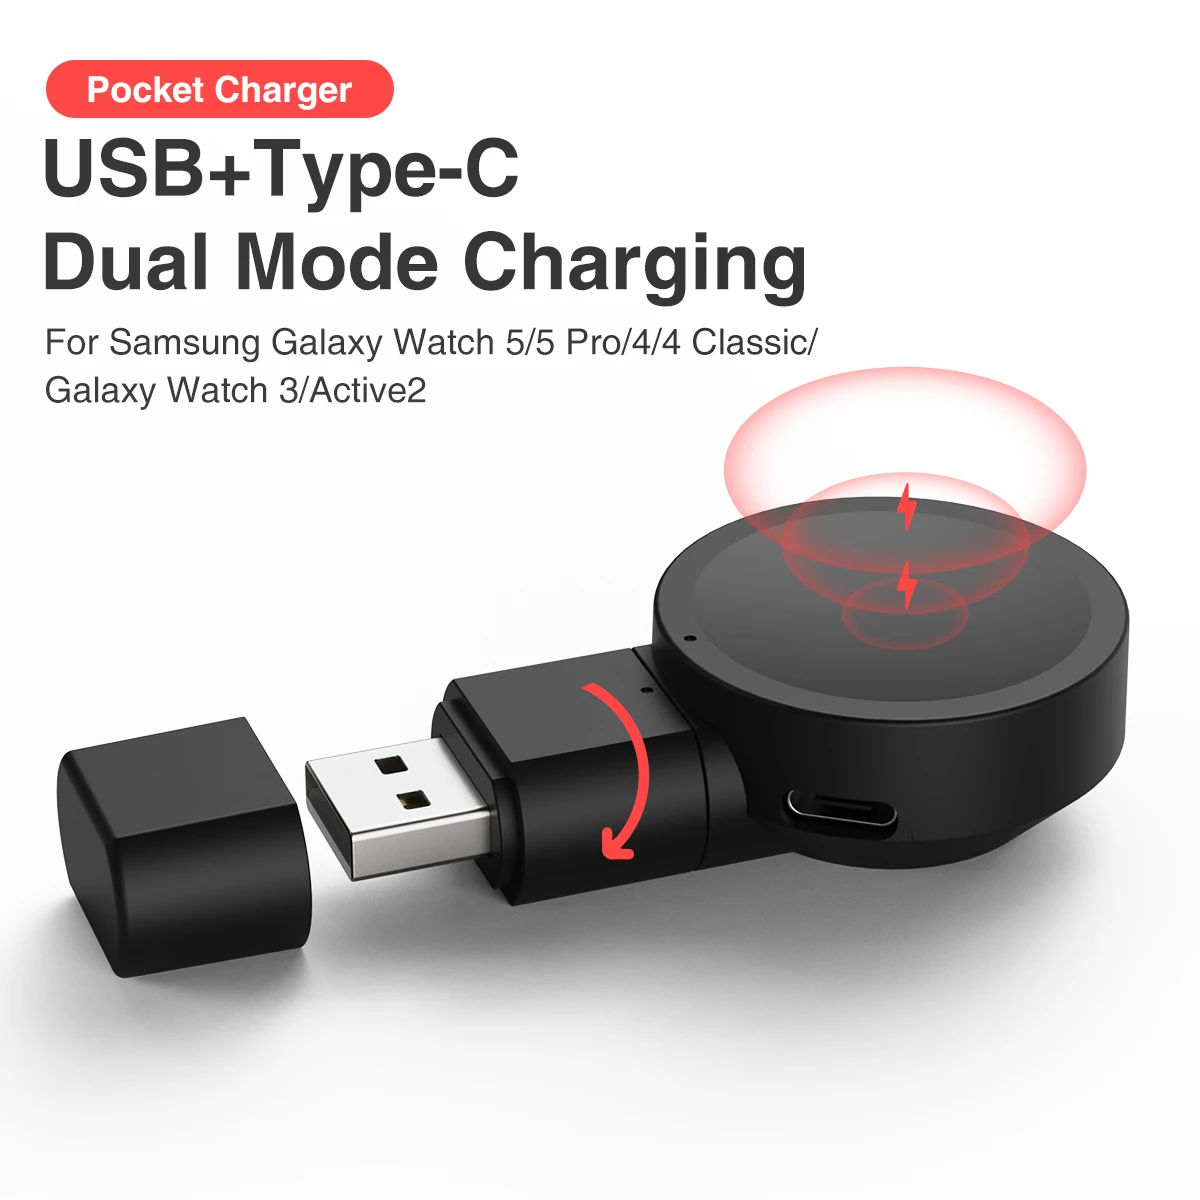 Dock Charger Adapter Wireless 